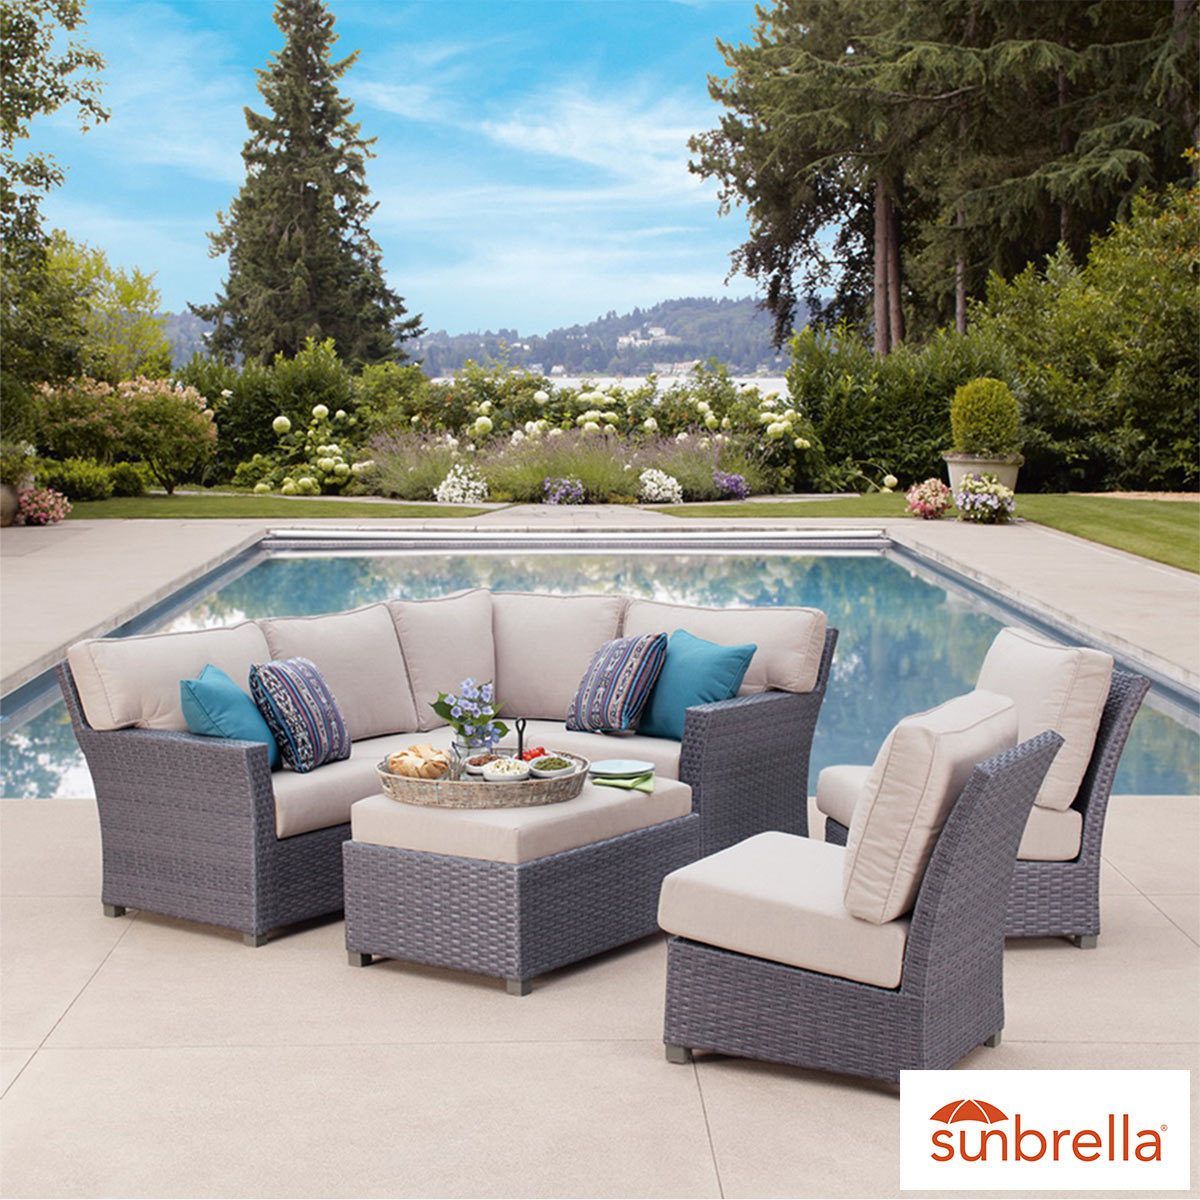 Pacific Casual Westchester 7 Piece Woven Sectional Seating Set | Costco With Regard To Outdoor Seating Sectional Patio Sets (View 7 of 15)